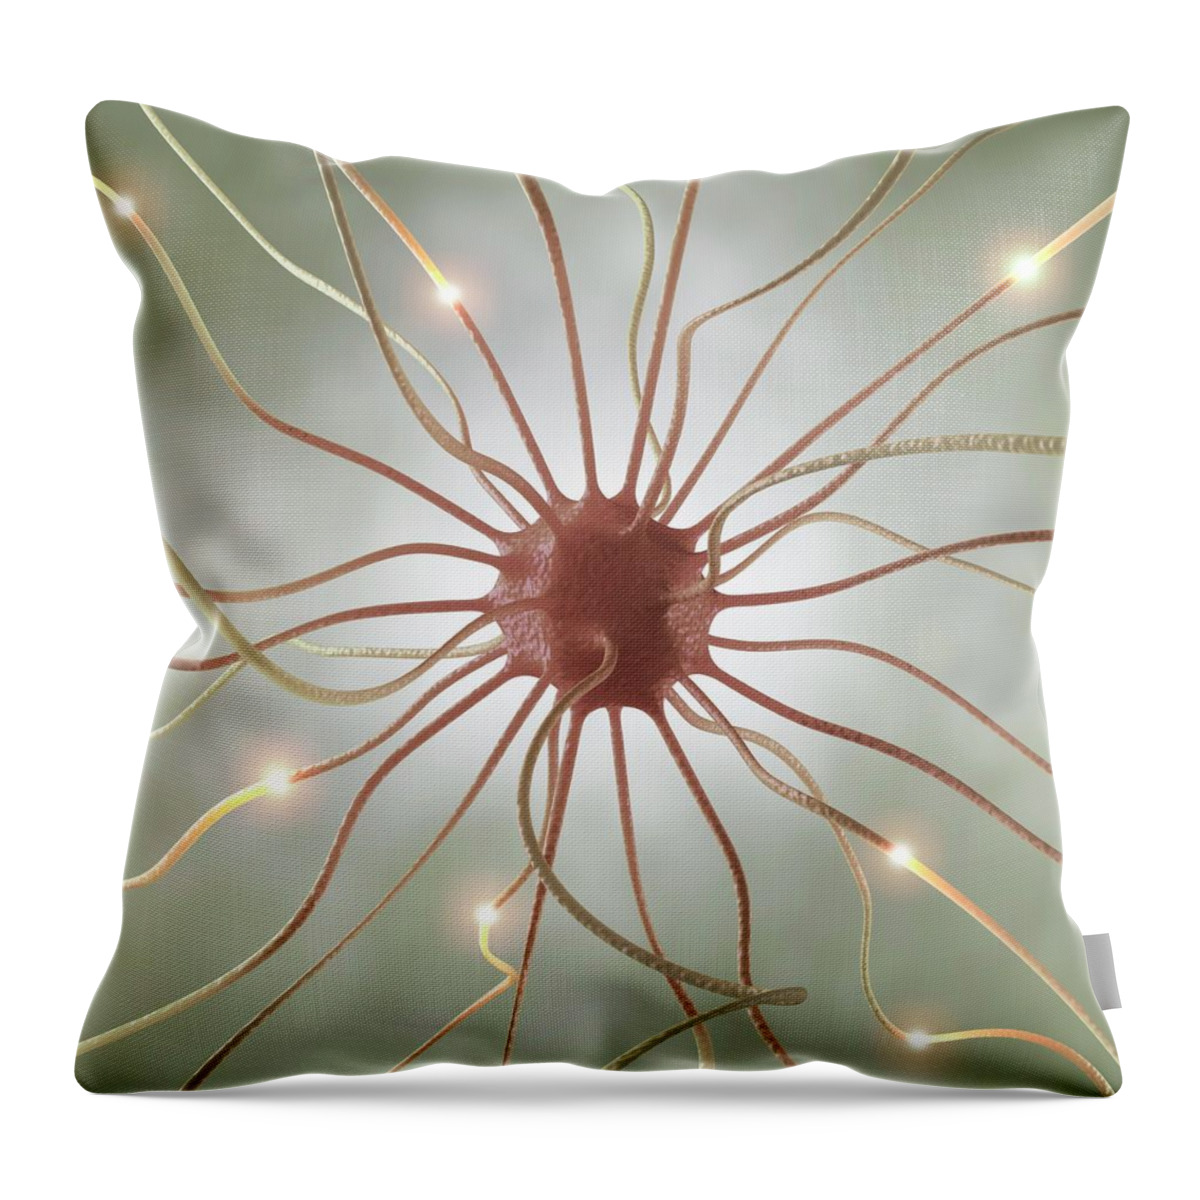 Color Image Throw Pillow featuring the digital art Nerve Cell, Artwork #3 by Ktsdesign